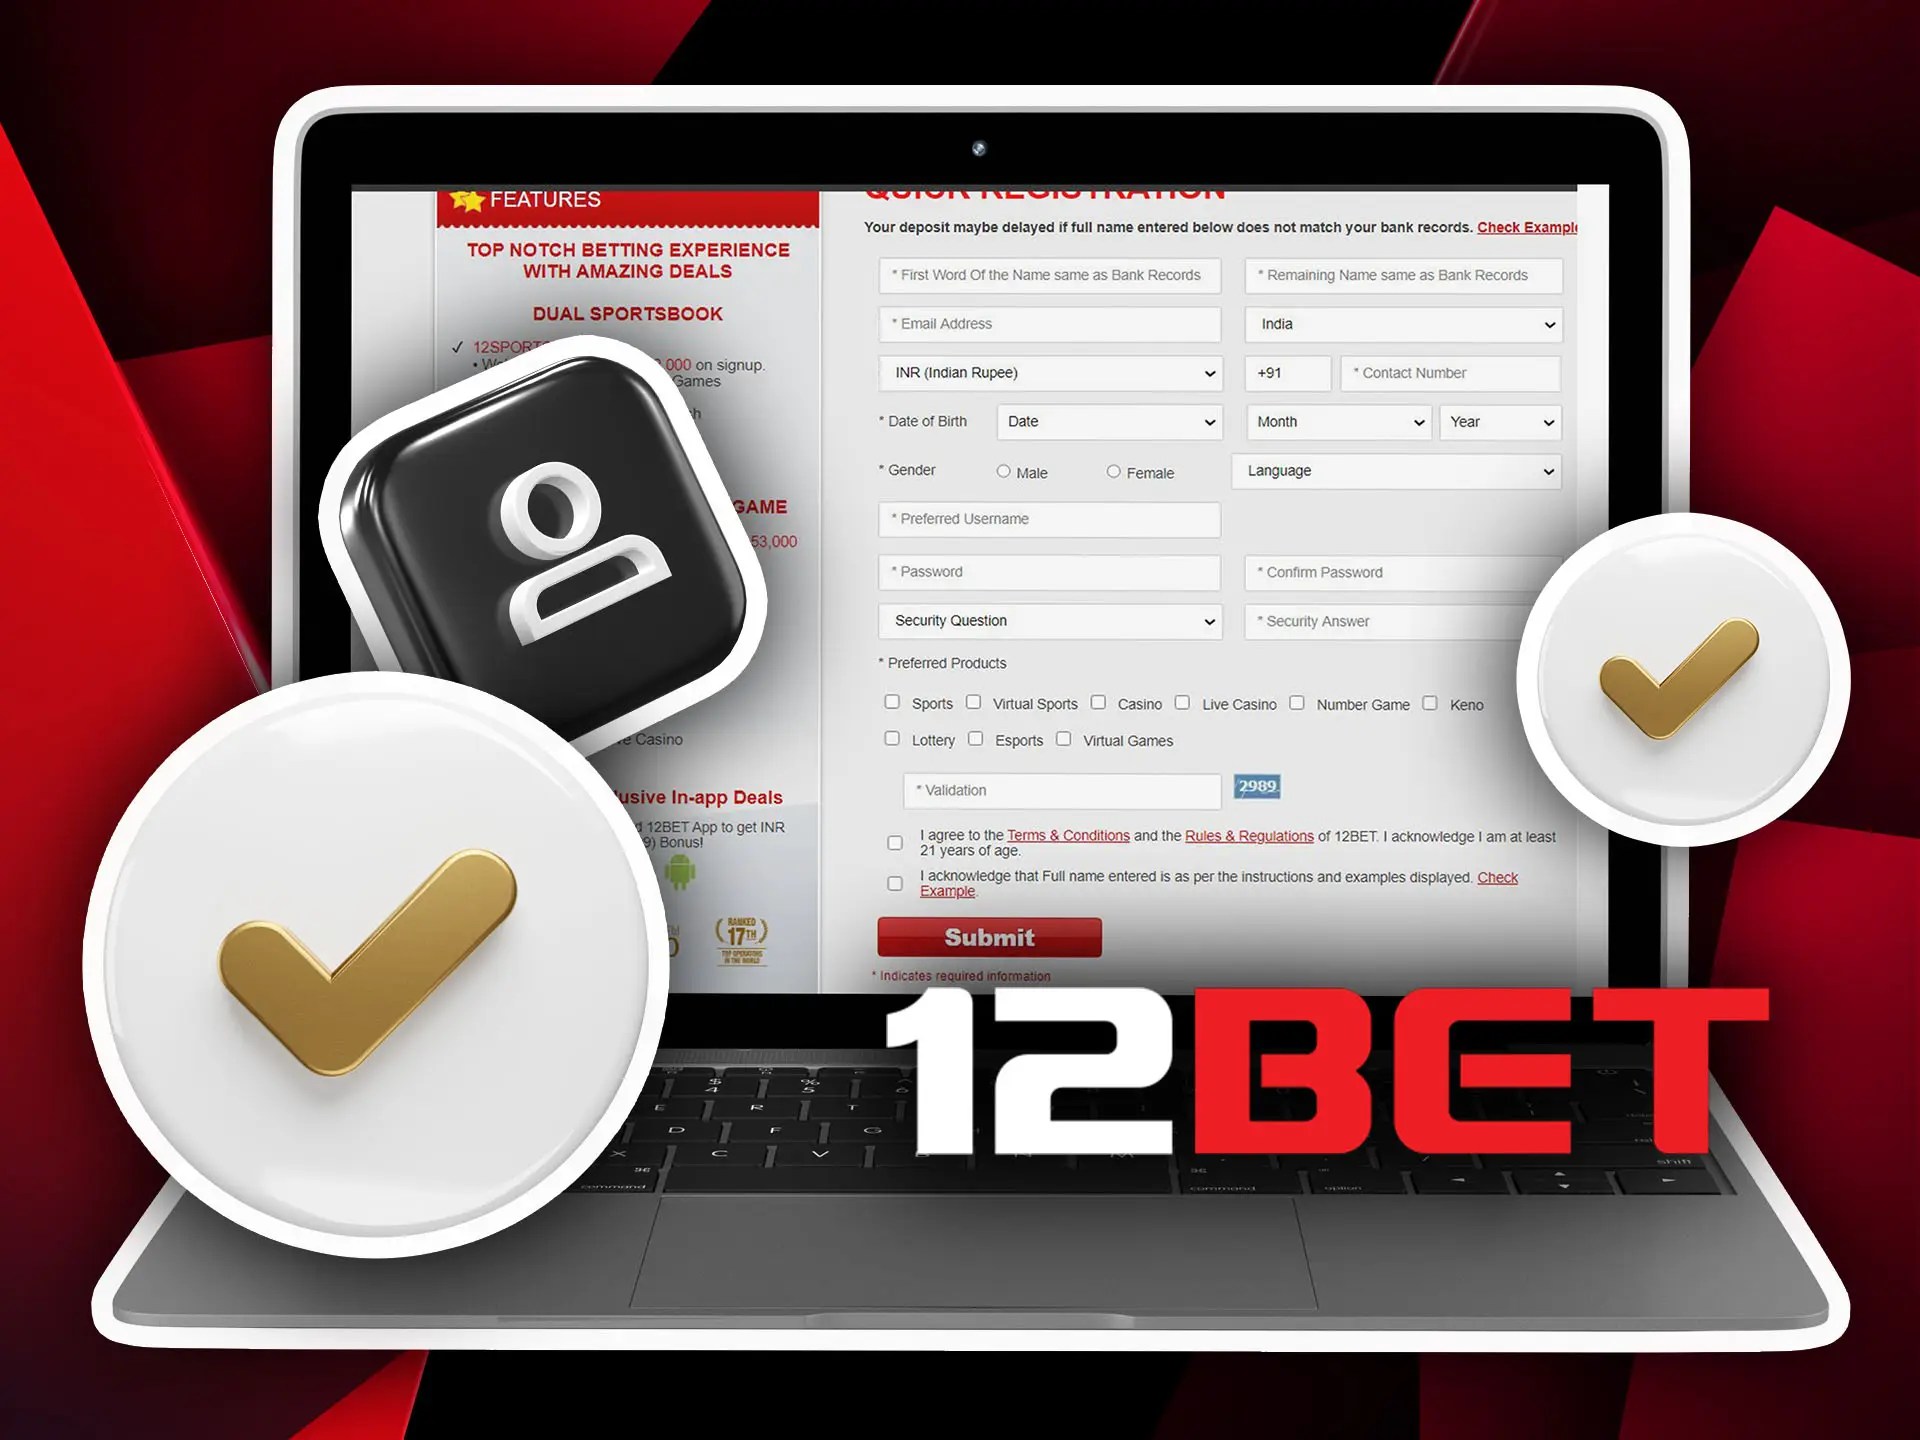 Verify your new 12bet account by providing the required data.